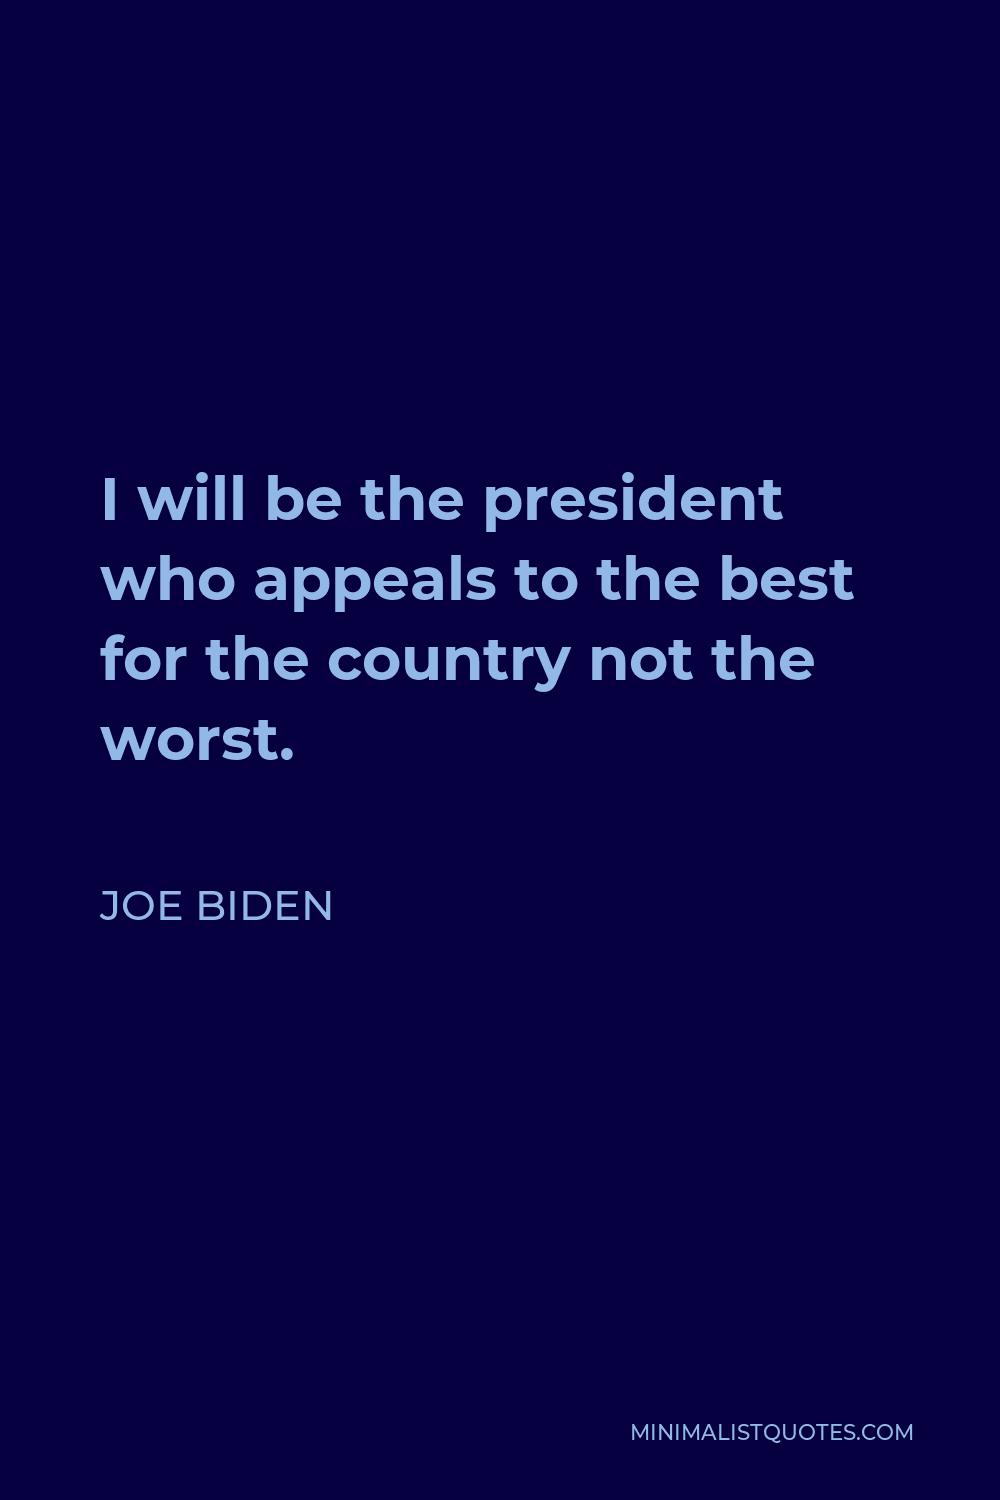 Joe Biden Quote - I will be the president who appeals to the best for the country not the worst.